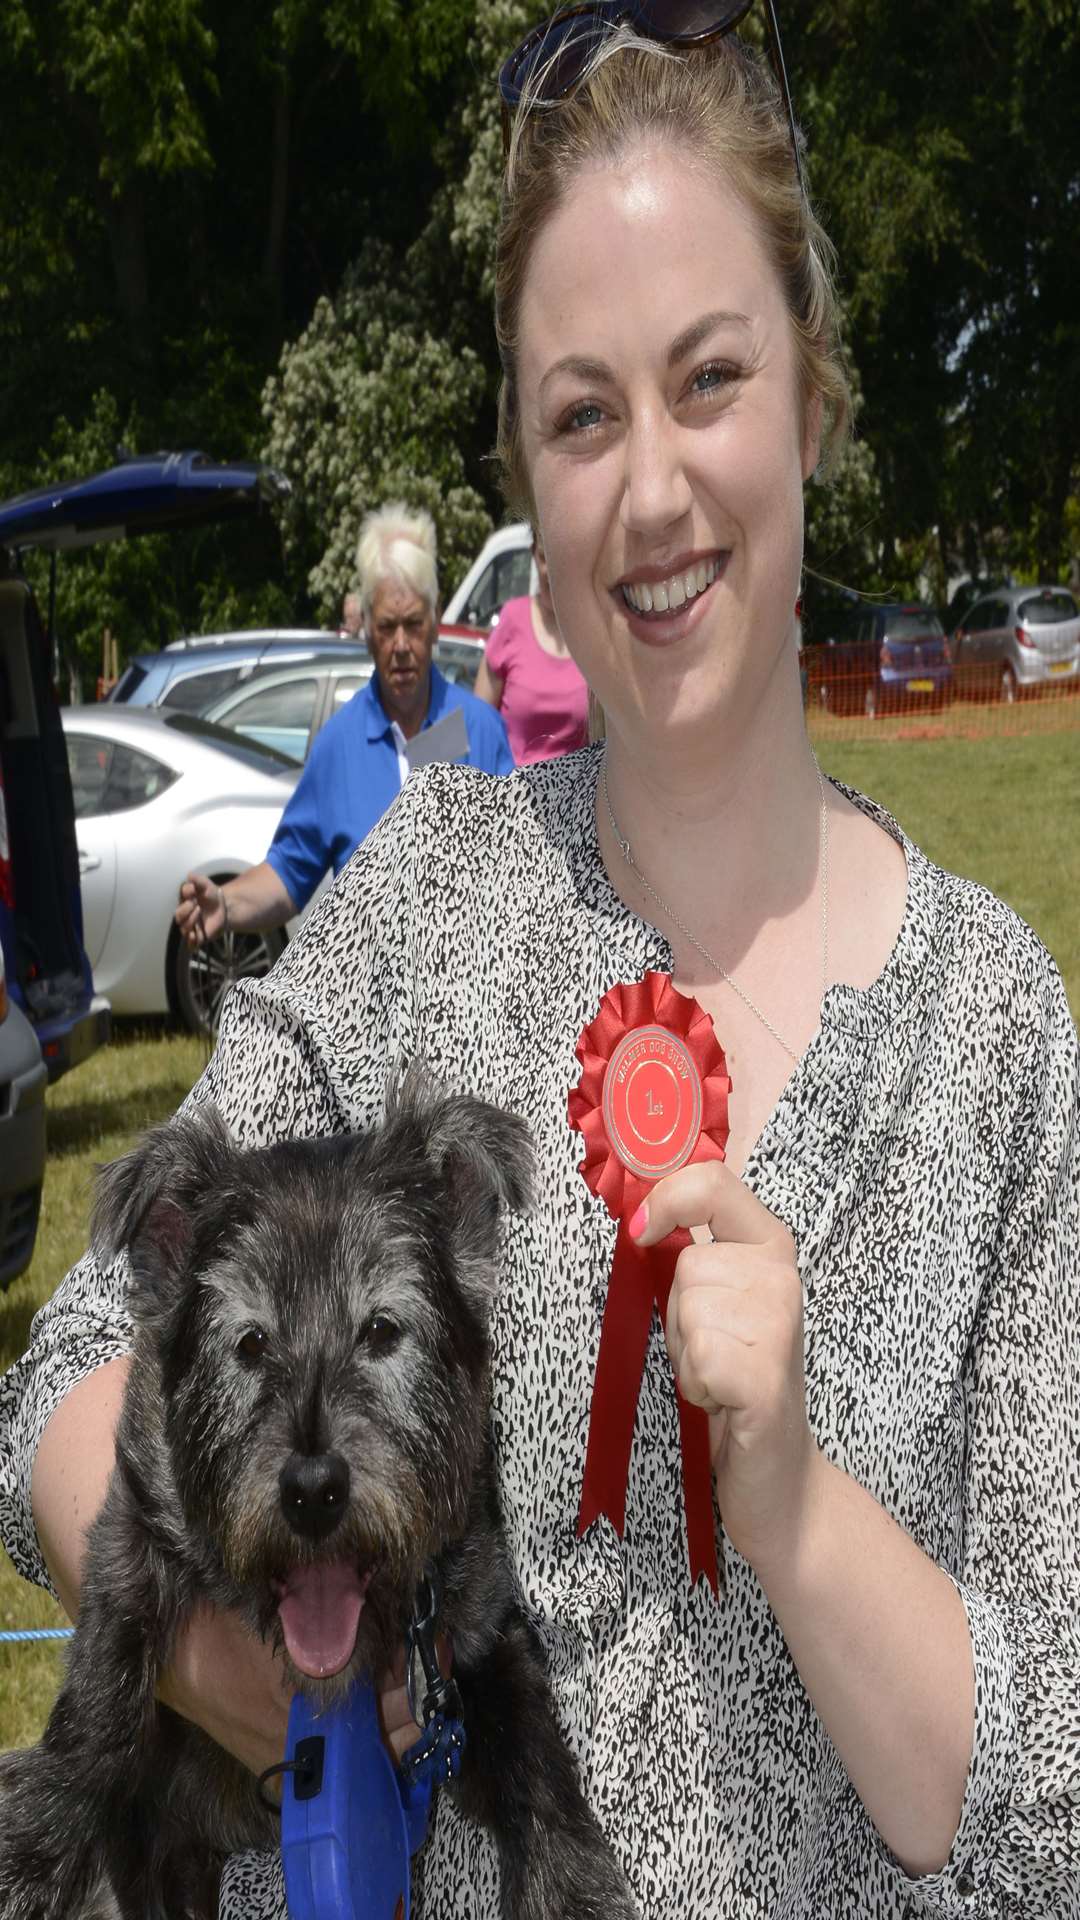 A first for Piwi and Meg Coates in the Pedigree Puppy class